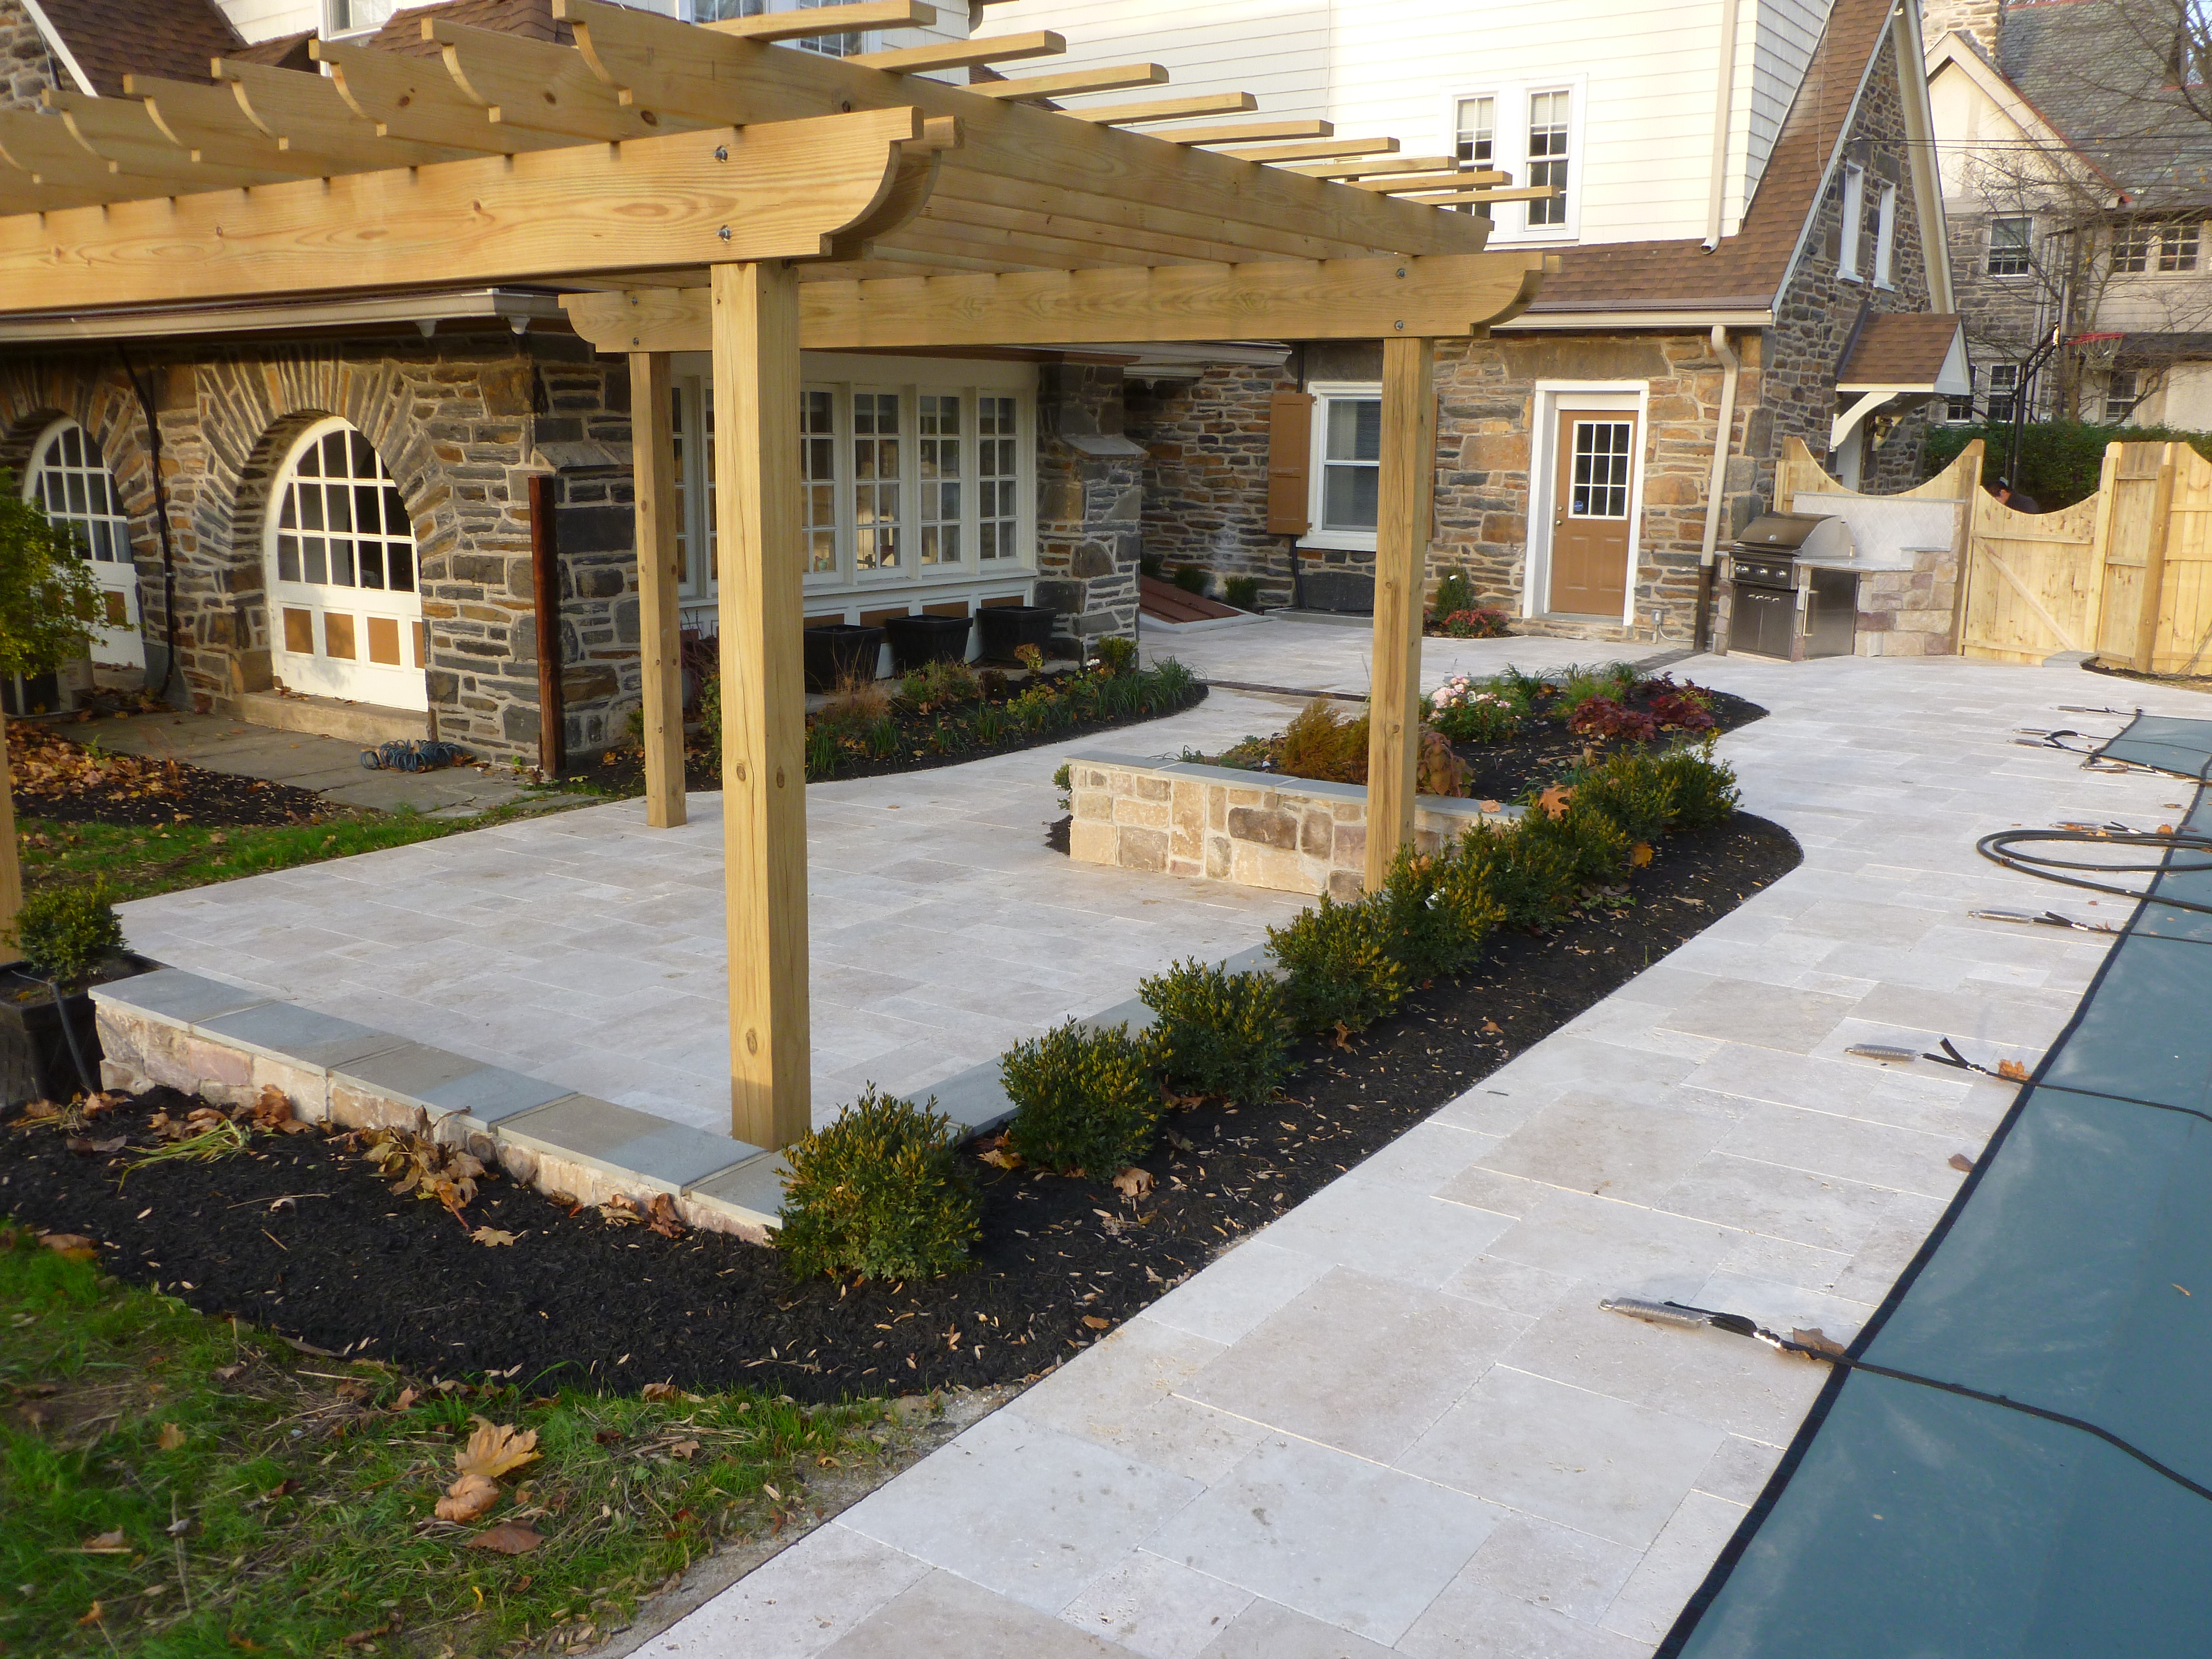 The final project featured a hardscaped patio and walls covered with Travertine pavers on all surfaces including the pool surround and a custom built pergola. (Image via aardweglandscaping.com – Main Line Philadelphia PA)